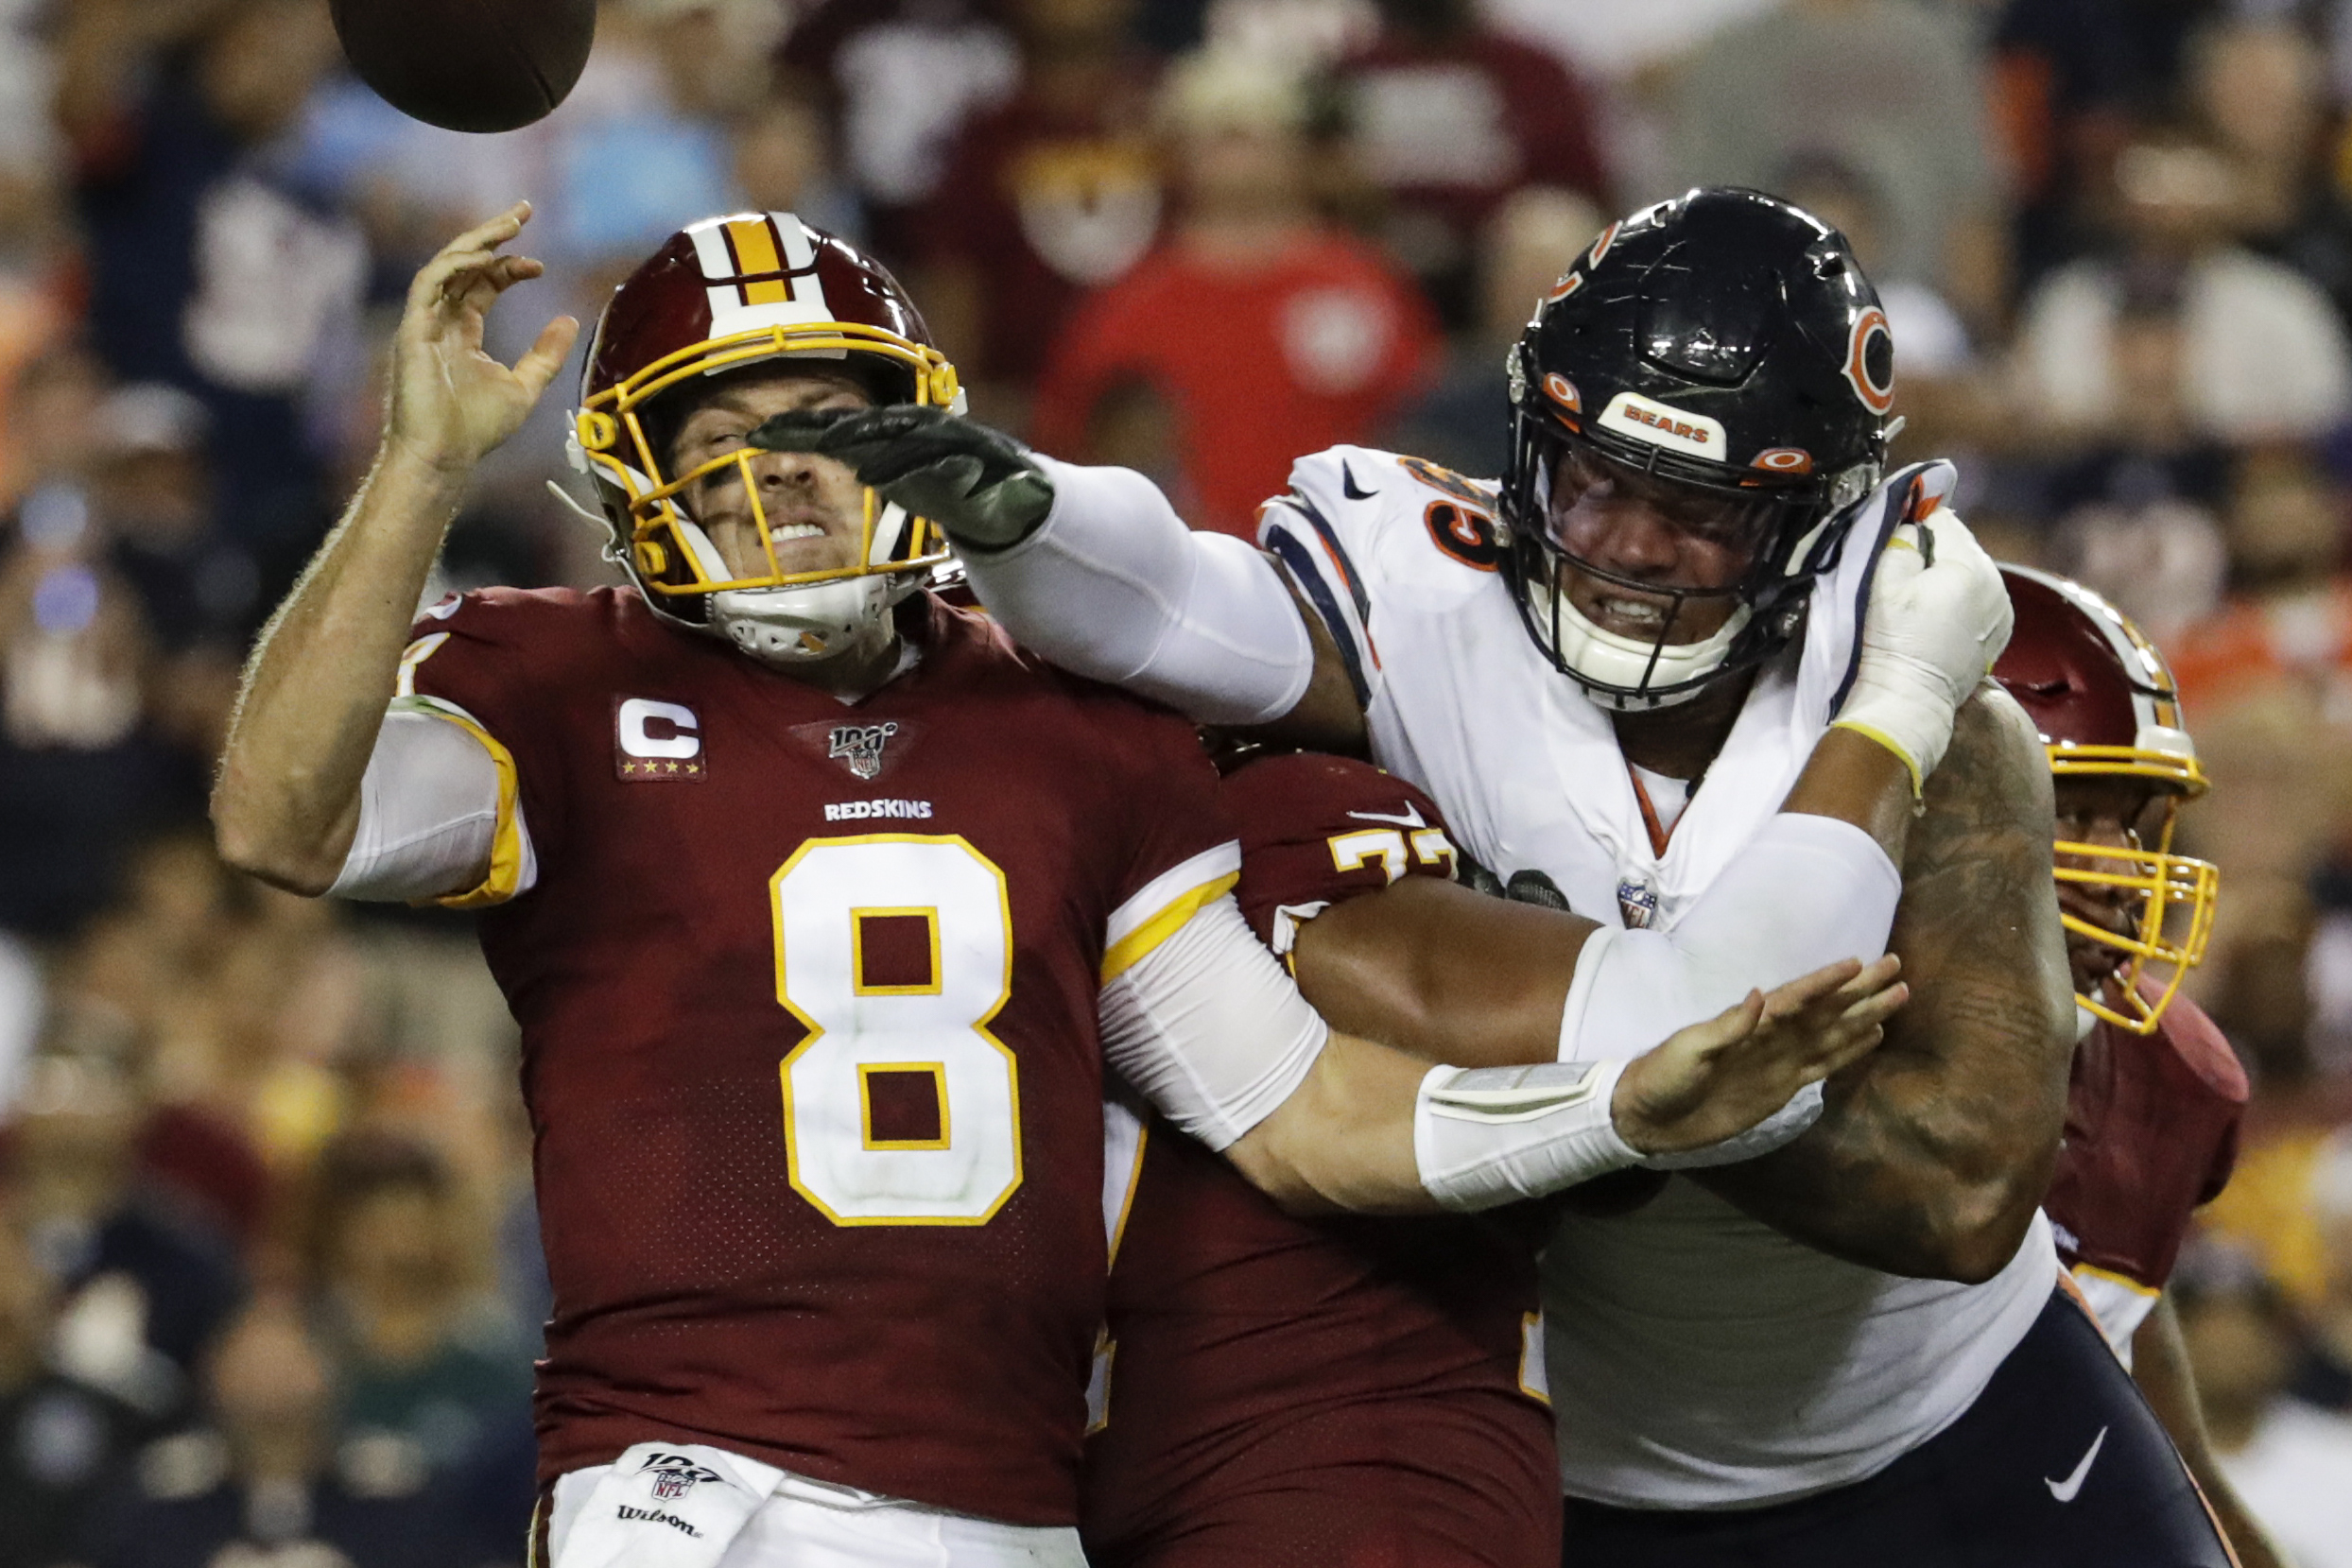 Redskins keep finding different ways to lose